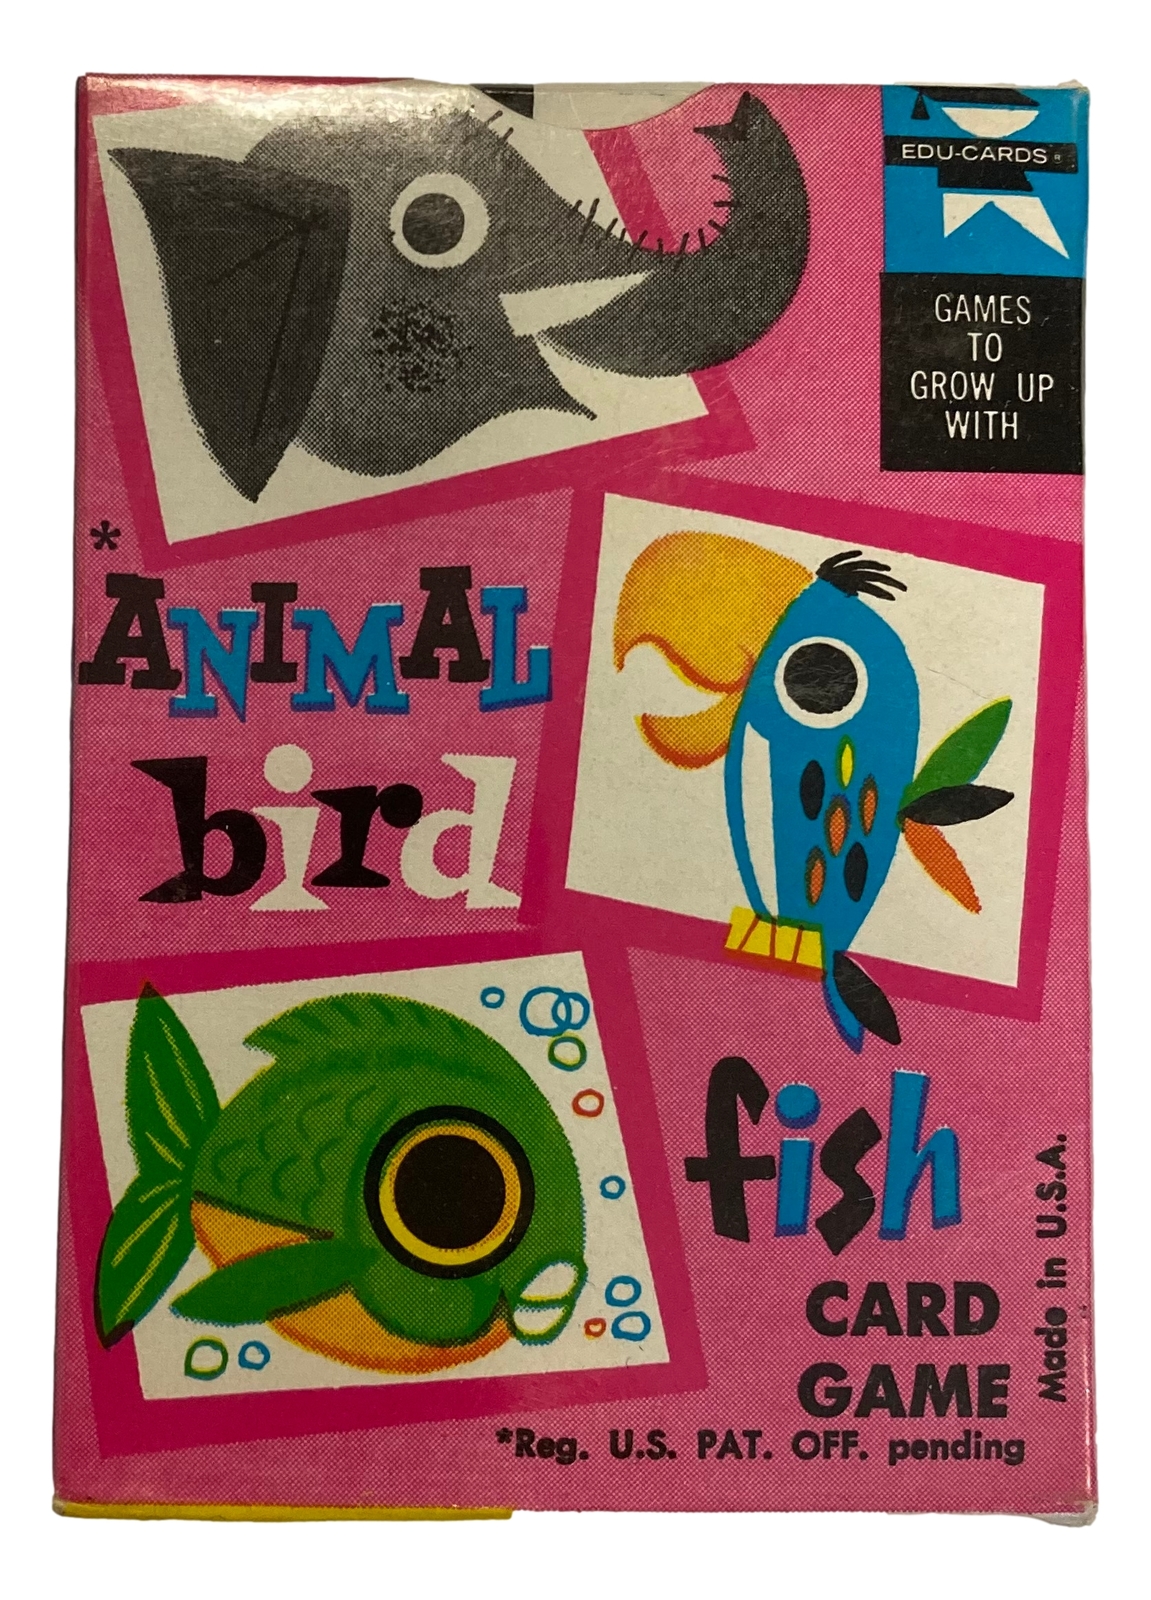 Primary image for Animal Bird Fish Vintage 1959 Edu-Cards Educational Playing Card Game